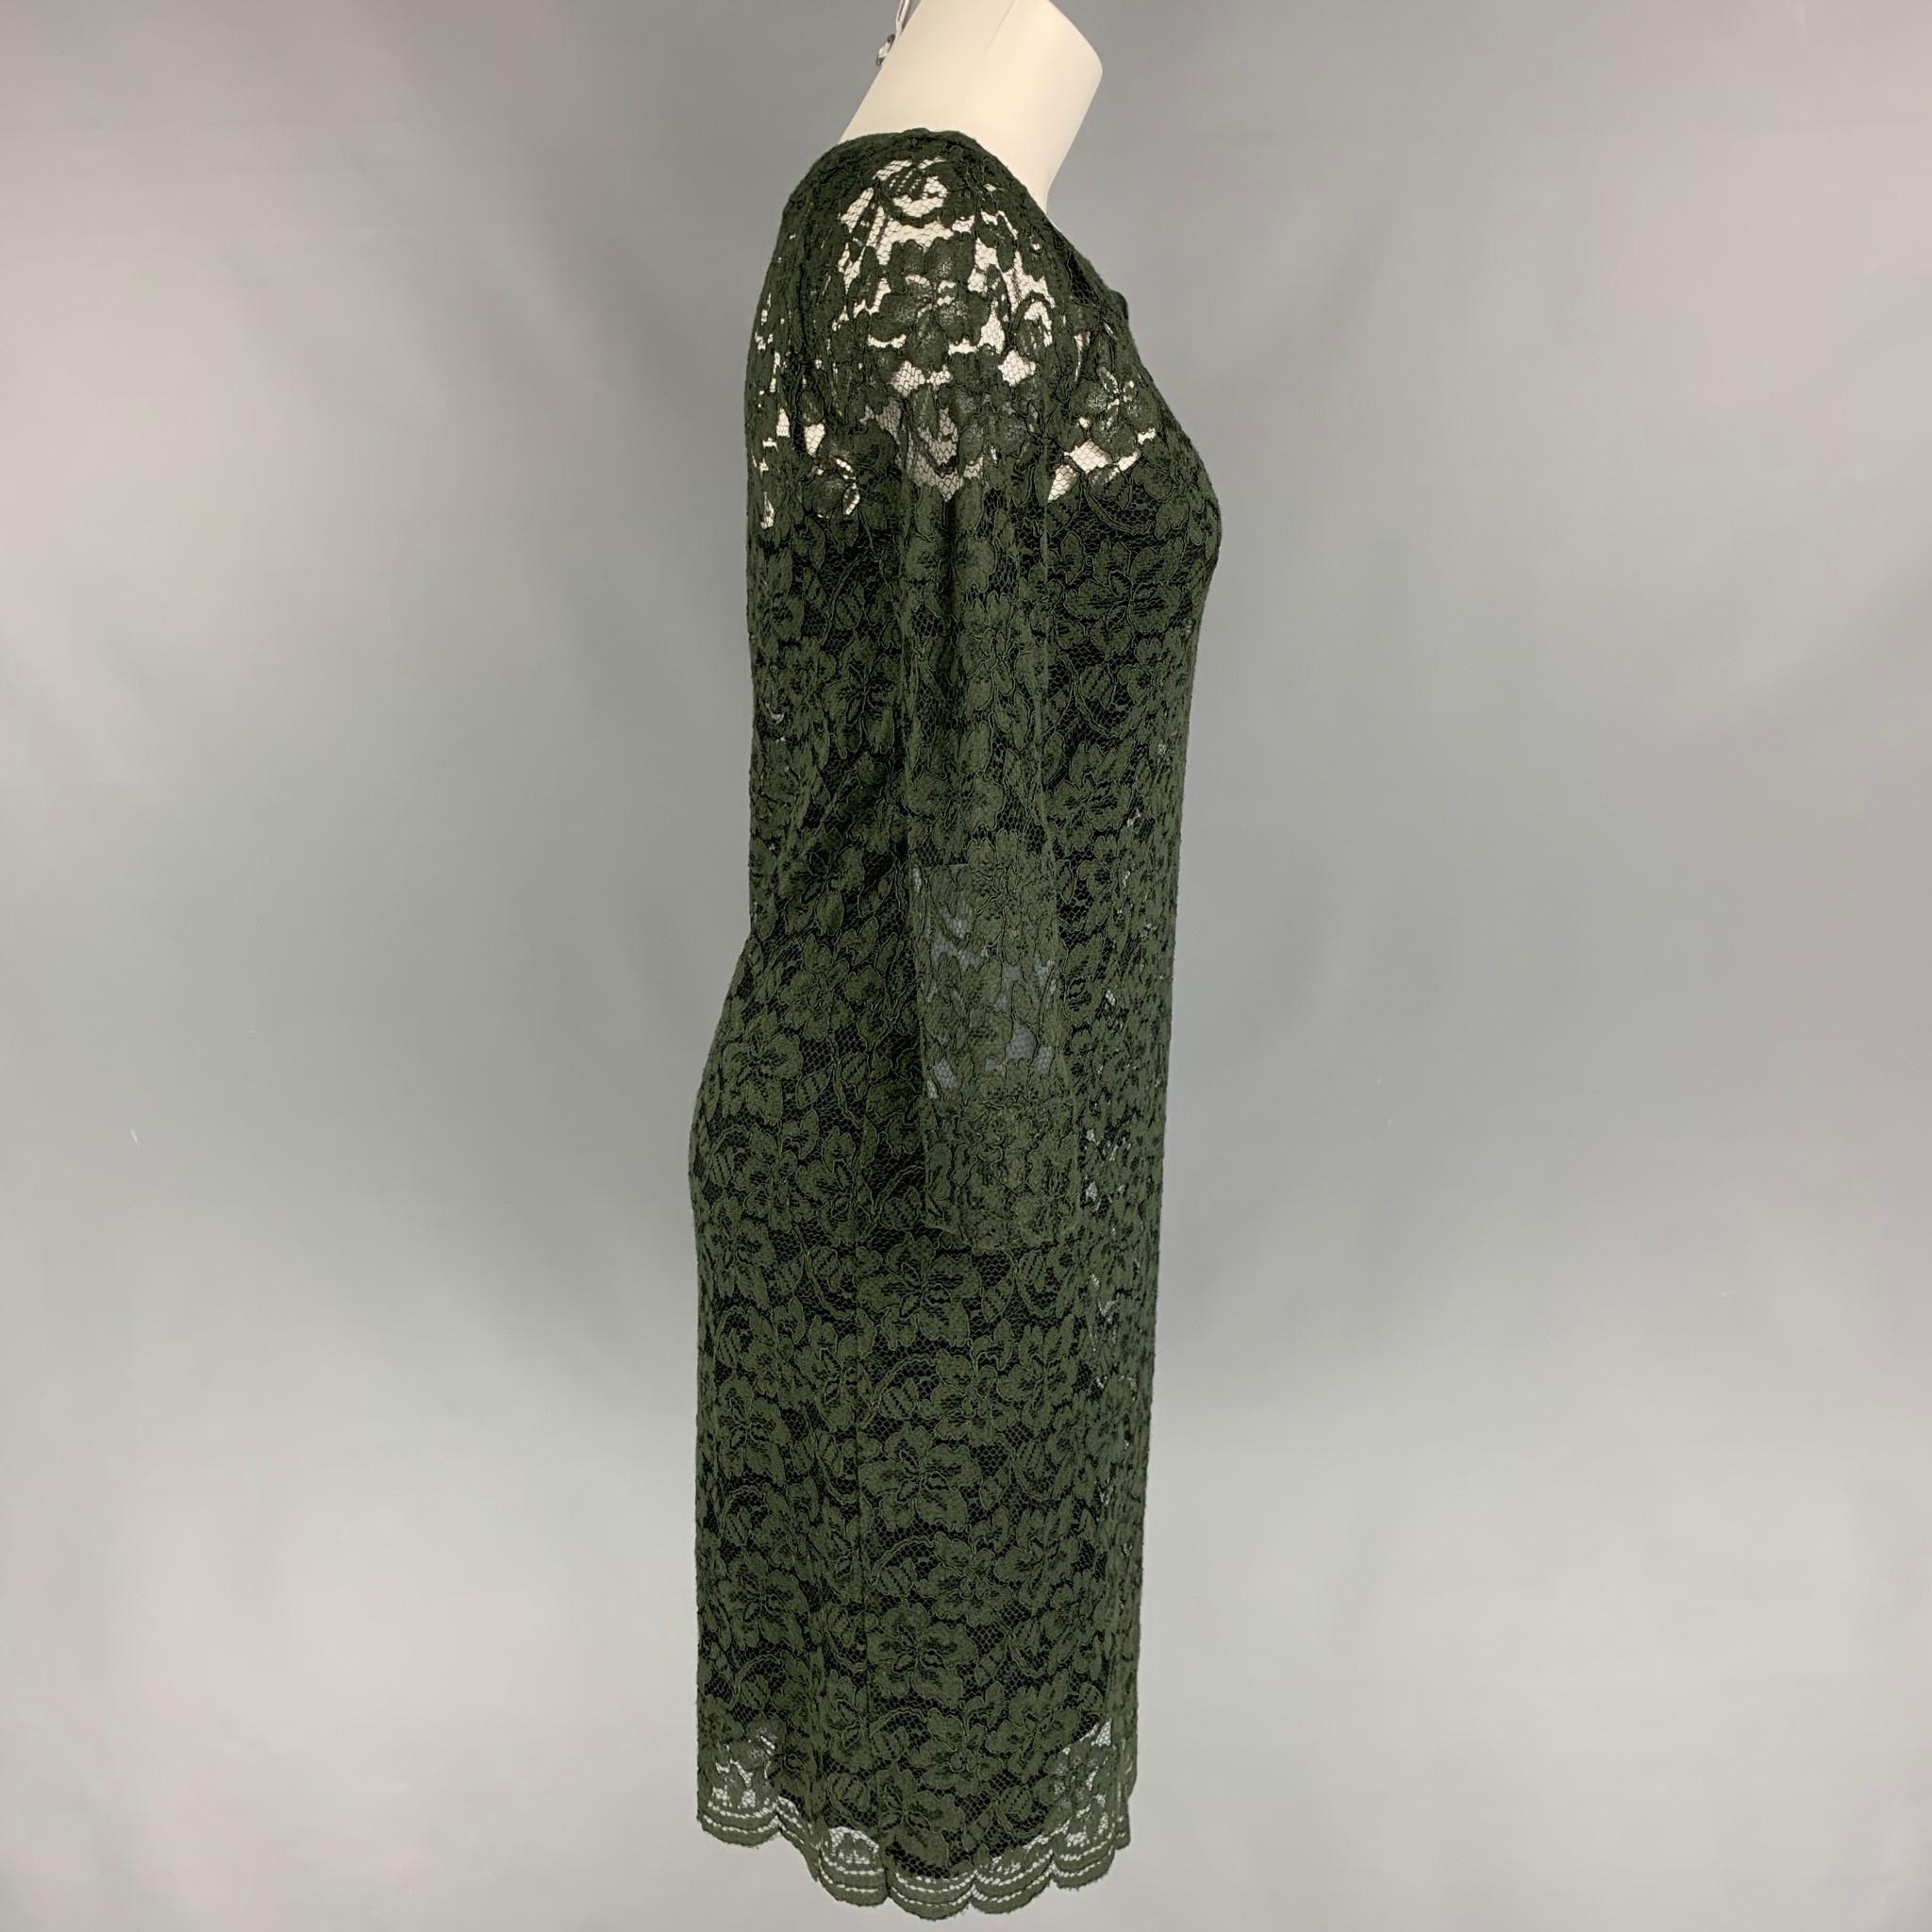 DIANE VON FURSTENBERG dress comes in a a dark green polyamide with a slip liner featuring a wide neckline. long sleeves, and a slip on style. 

Very Good Pre-Owned Condition.
Marked: 4

Measurements:

Shoulder: 17 in.
Bust: 32 in.
Hip: 34